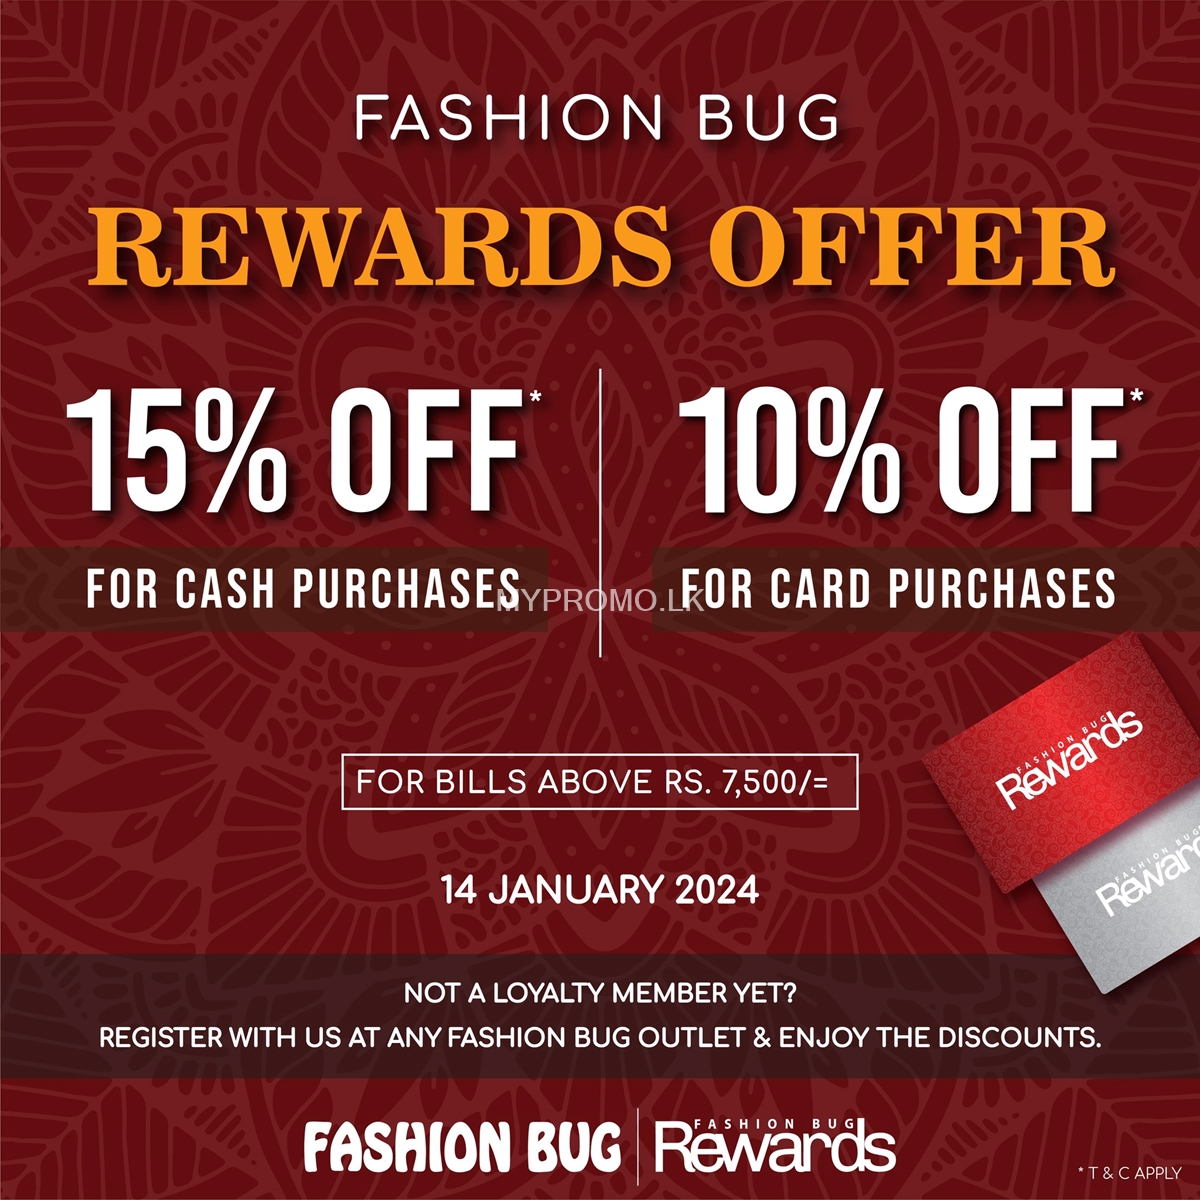 Special offer for Fashion Bug Rewards loyalty card members!